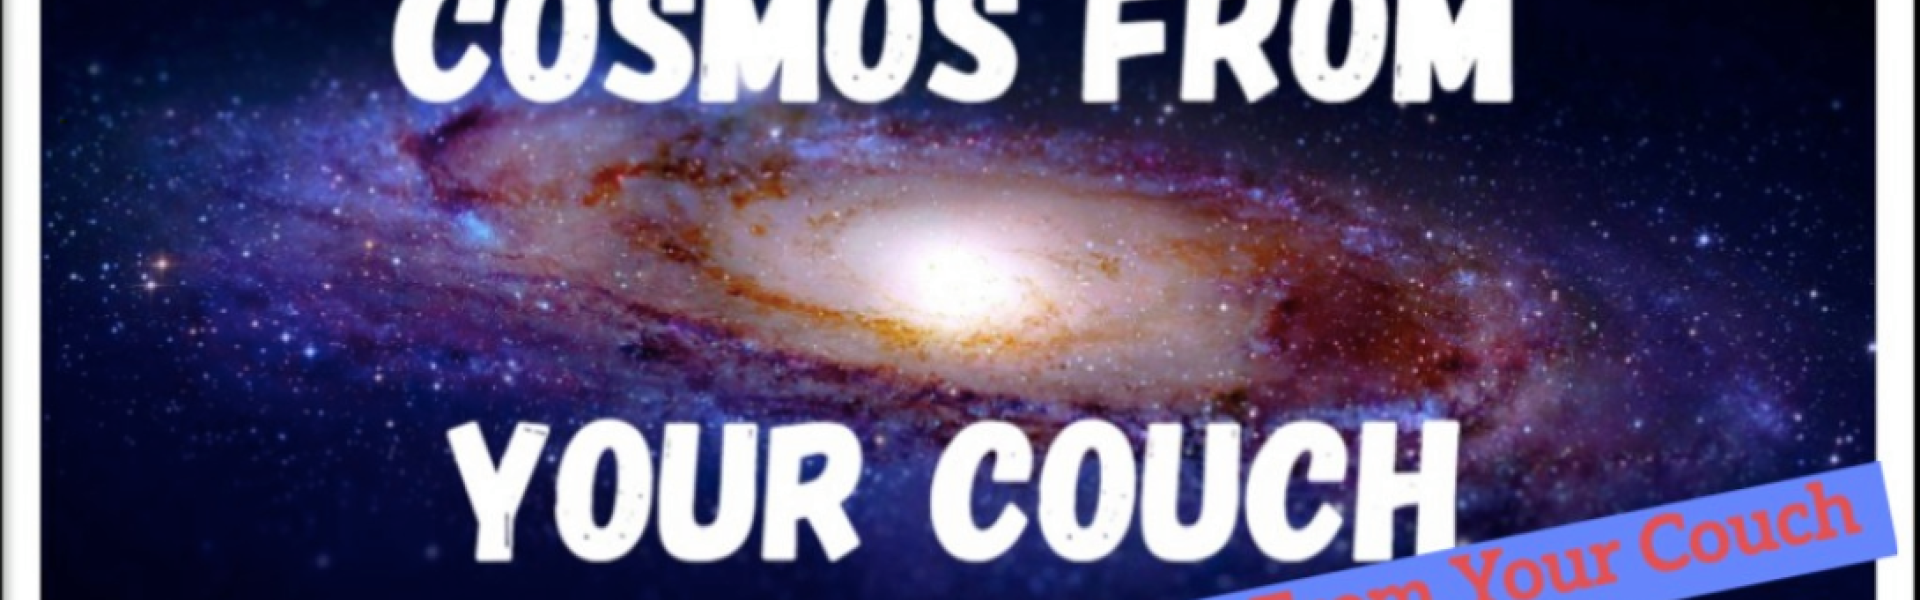 Cosmos From Your Couch - Questions